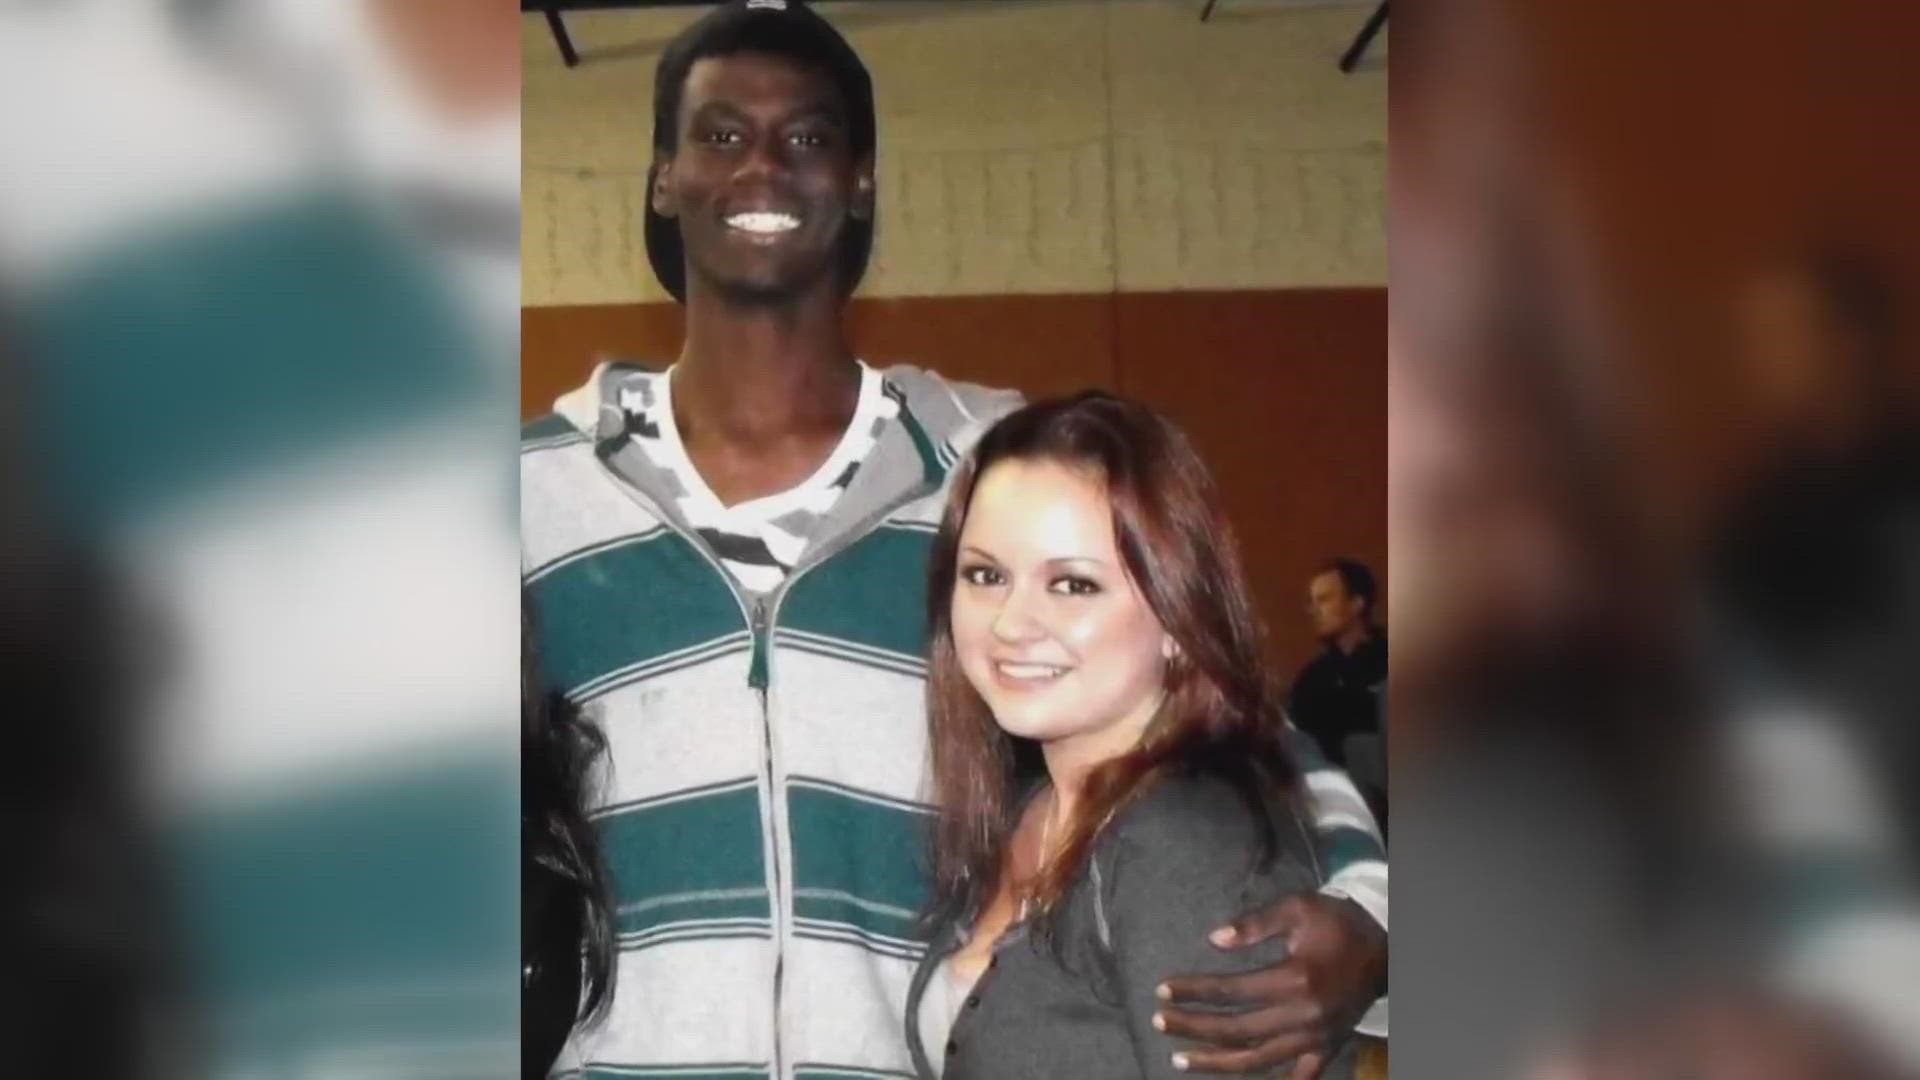 Sacramentan Angelina Paxton will remembers her long time friend Tyre Nichols as more of a brother, family. She now calls for justice in his death.